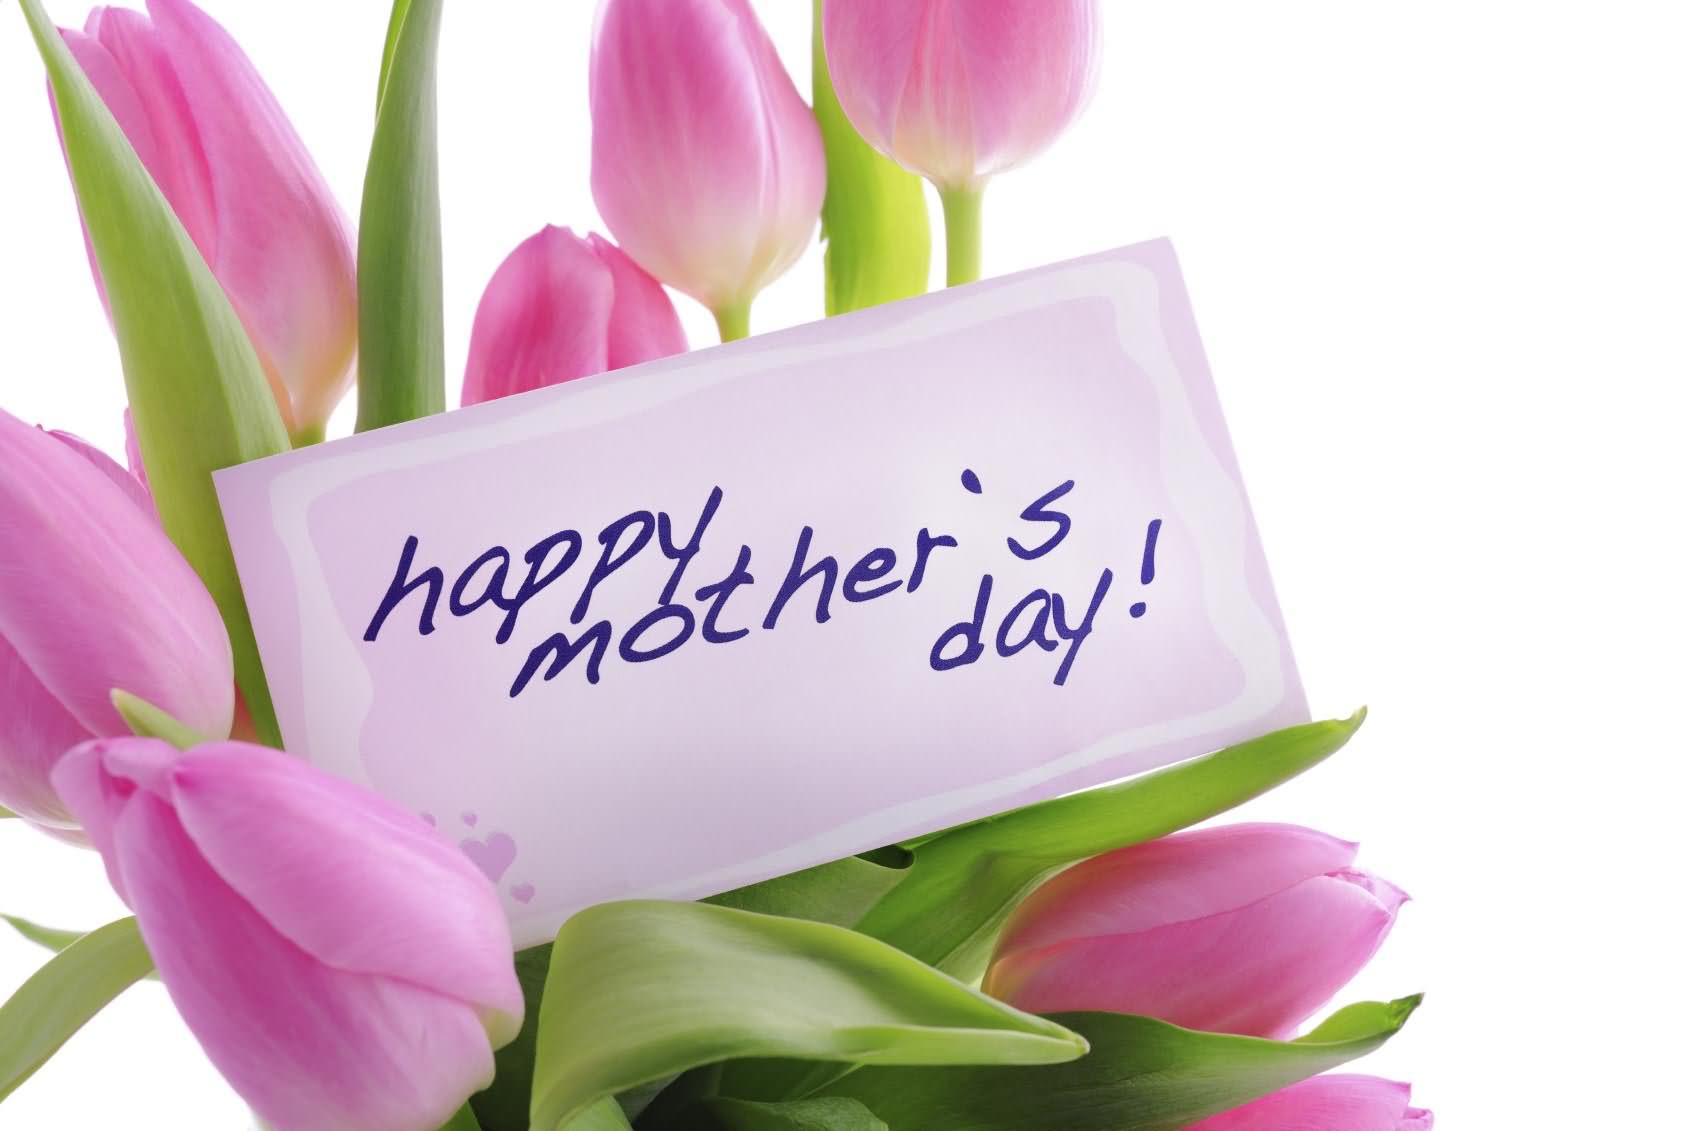 Happy Mother’s Day Greeting Card With Flowers